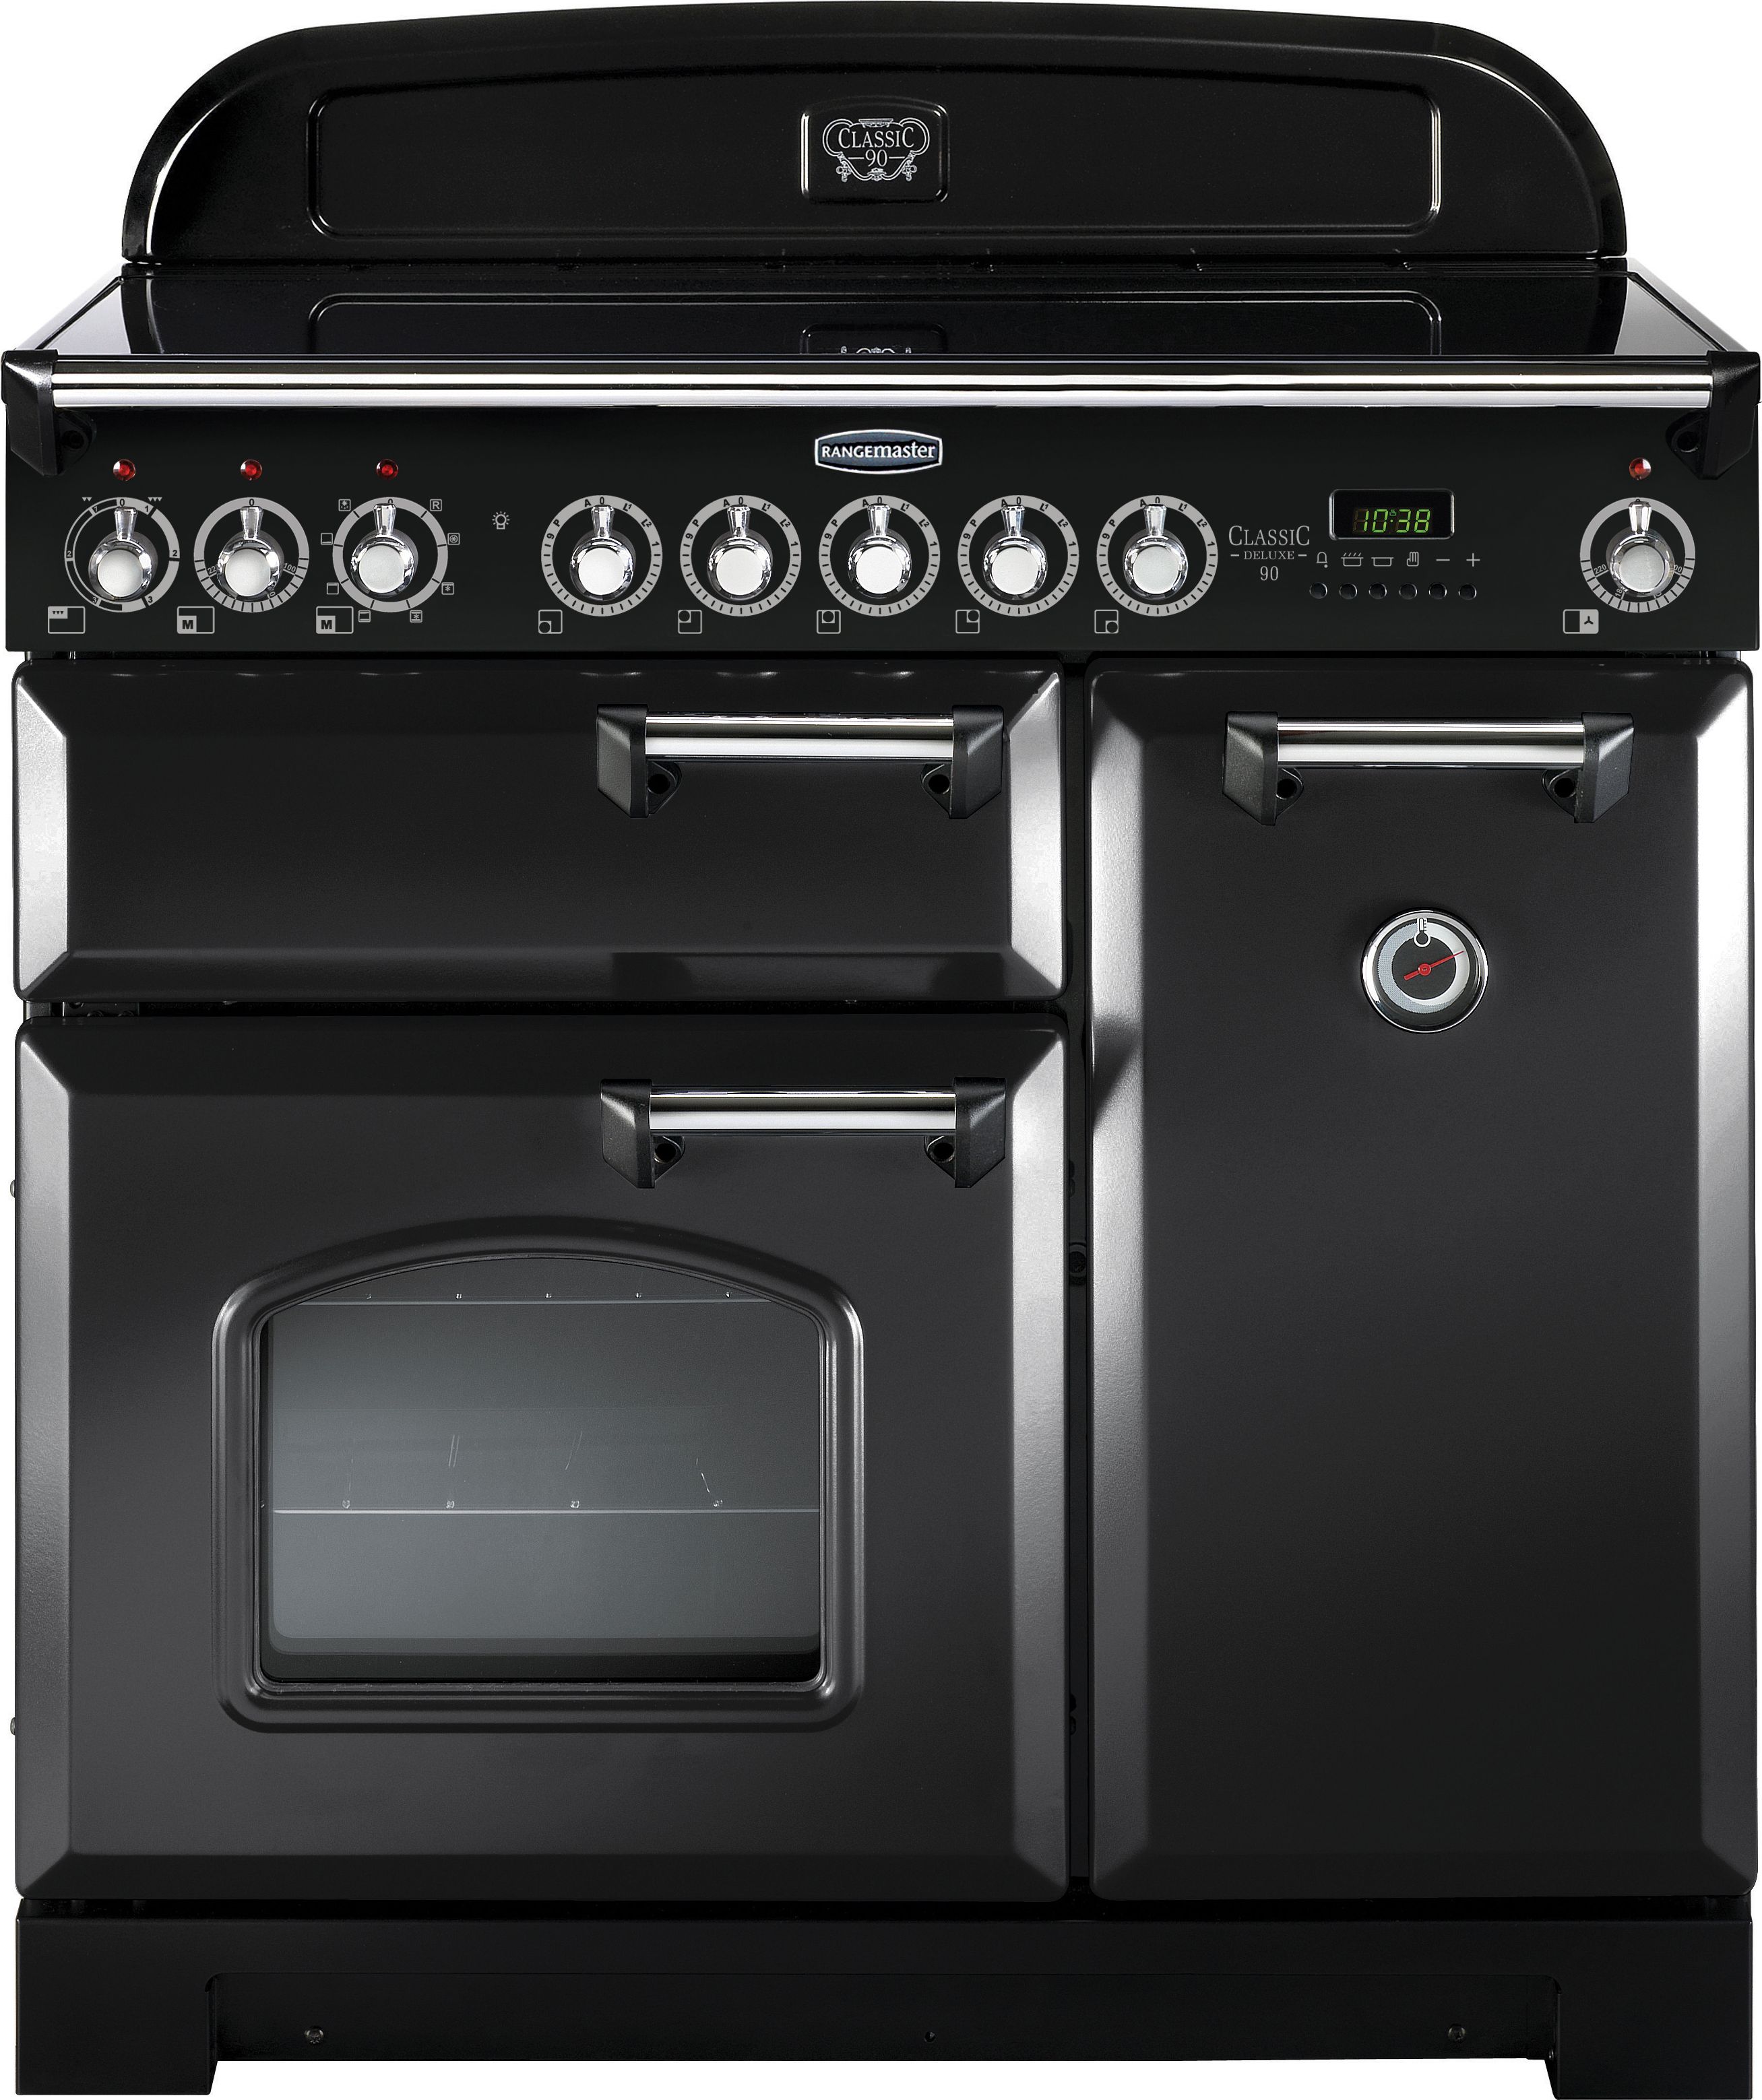 Rangemaster Classic Deluxe CDL90EICB/C 90cm Electric Range Cooker with Induction Hob - Charcoal Black / Chrome - A/A Rated, Black